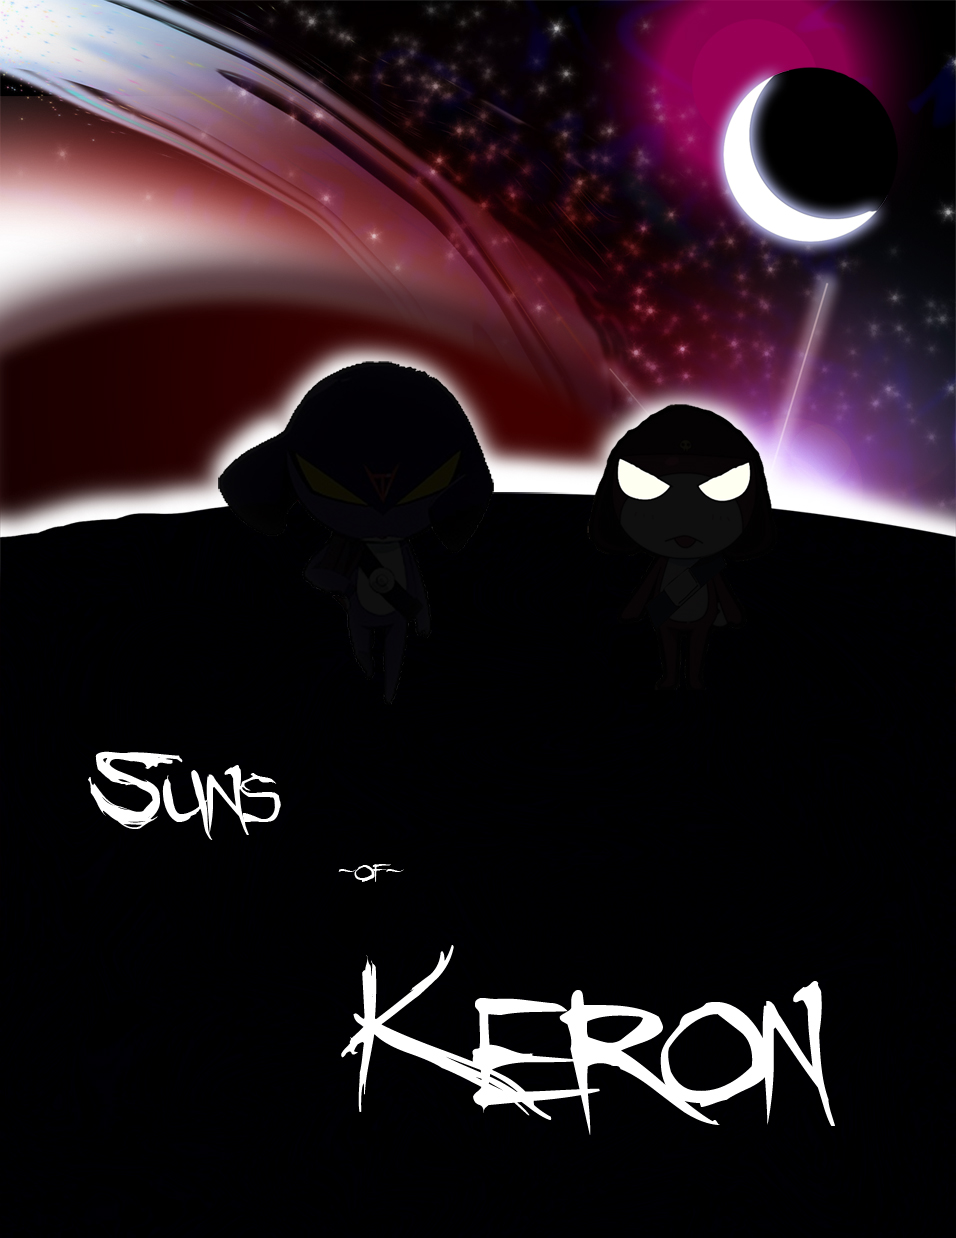 Suns of Keron Cover/Poster by DragonWingedGirl